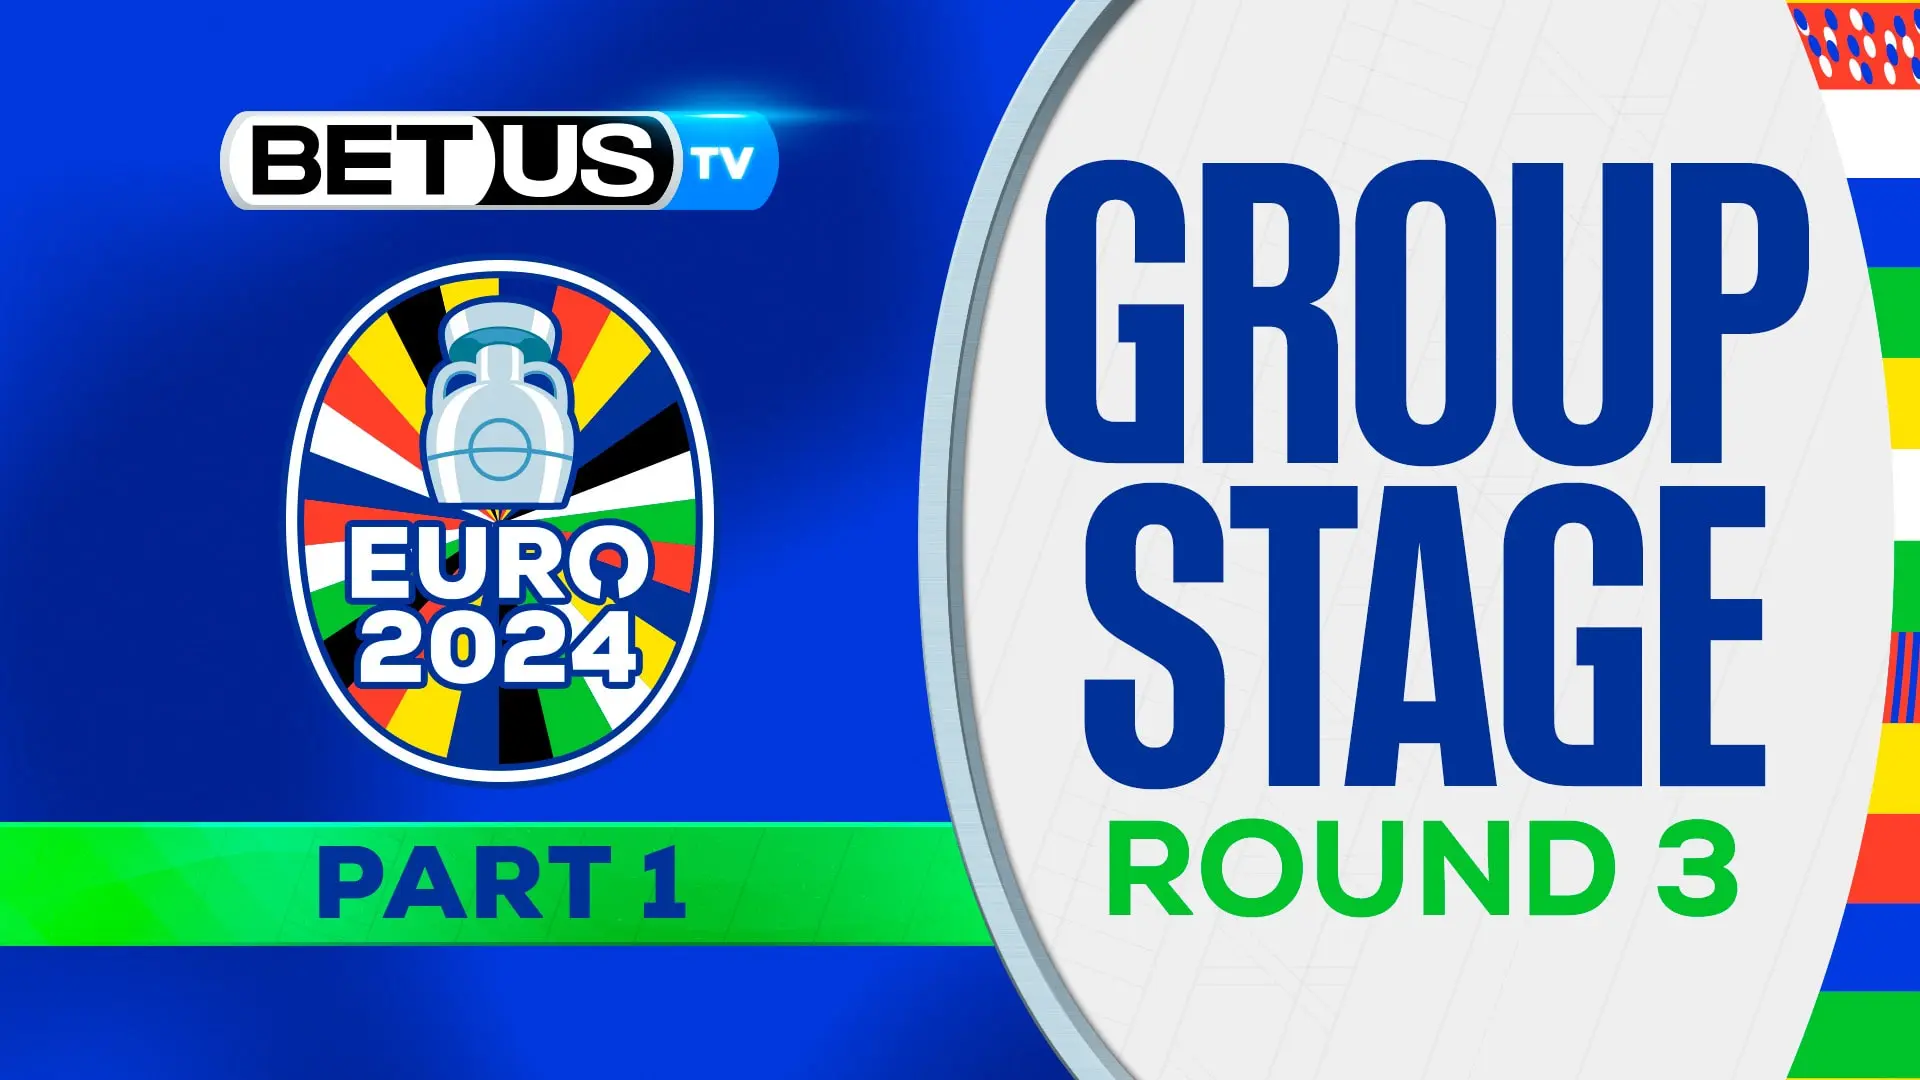 EURO 2024: Who’s qualifying to the next round? Group Stage Matchday 3 Picks (Part 1)